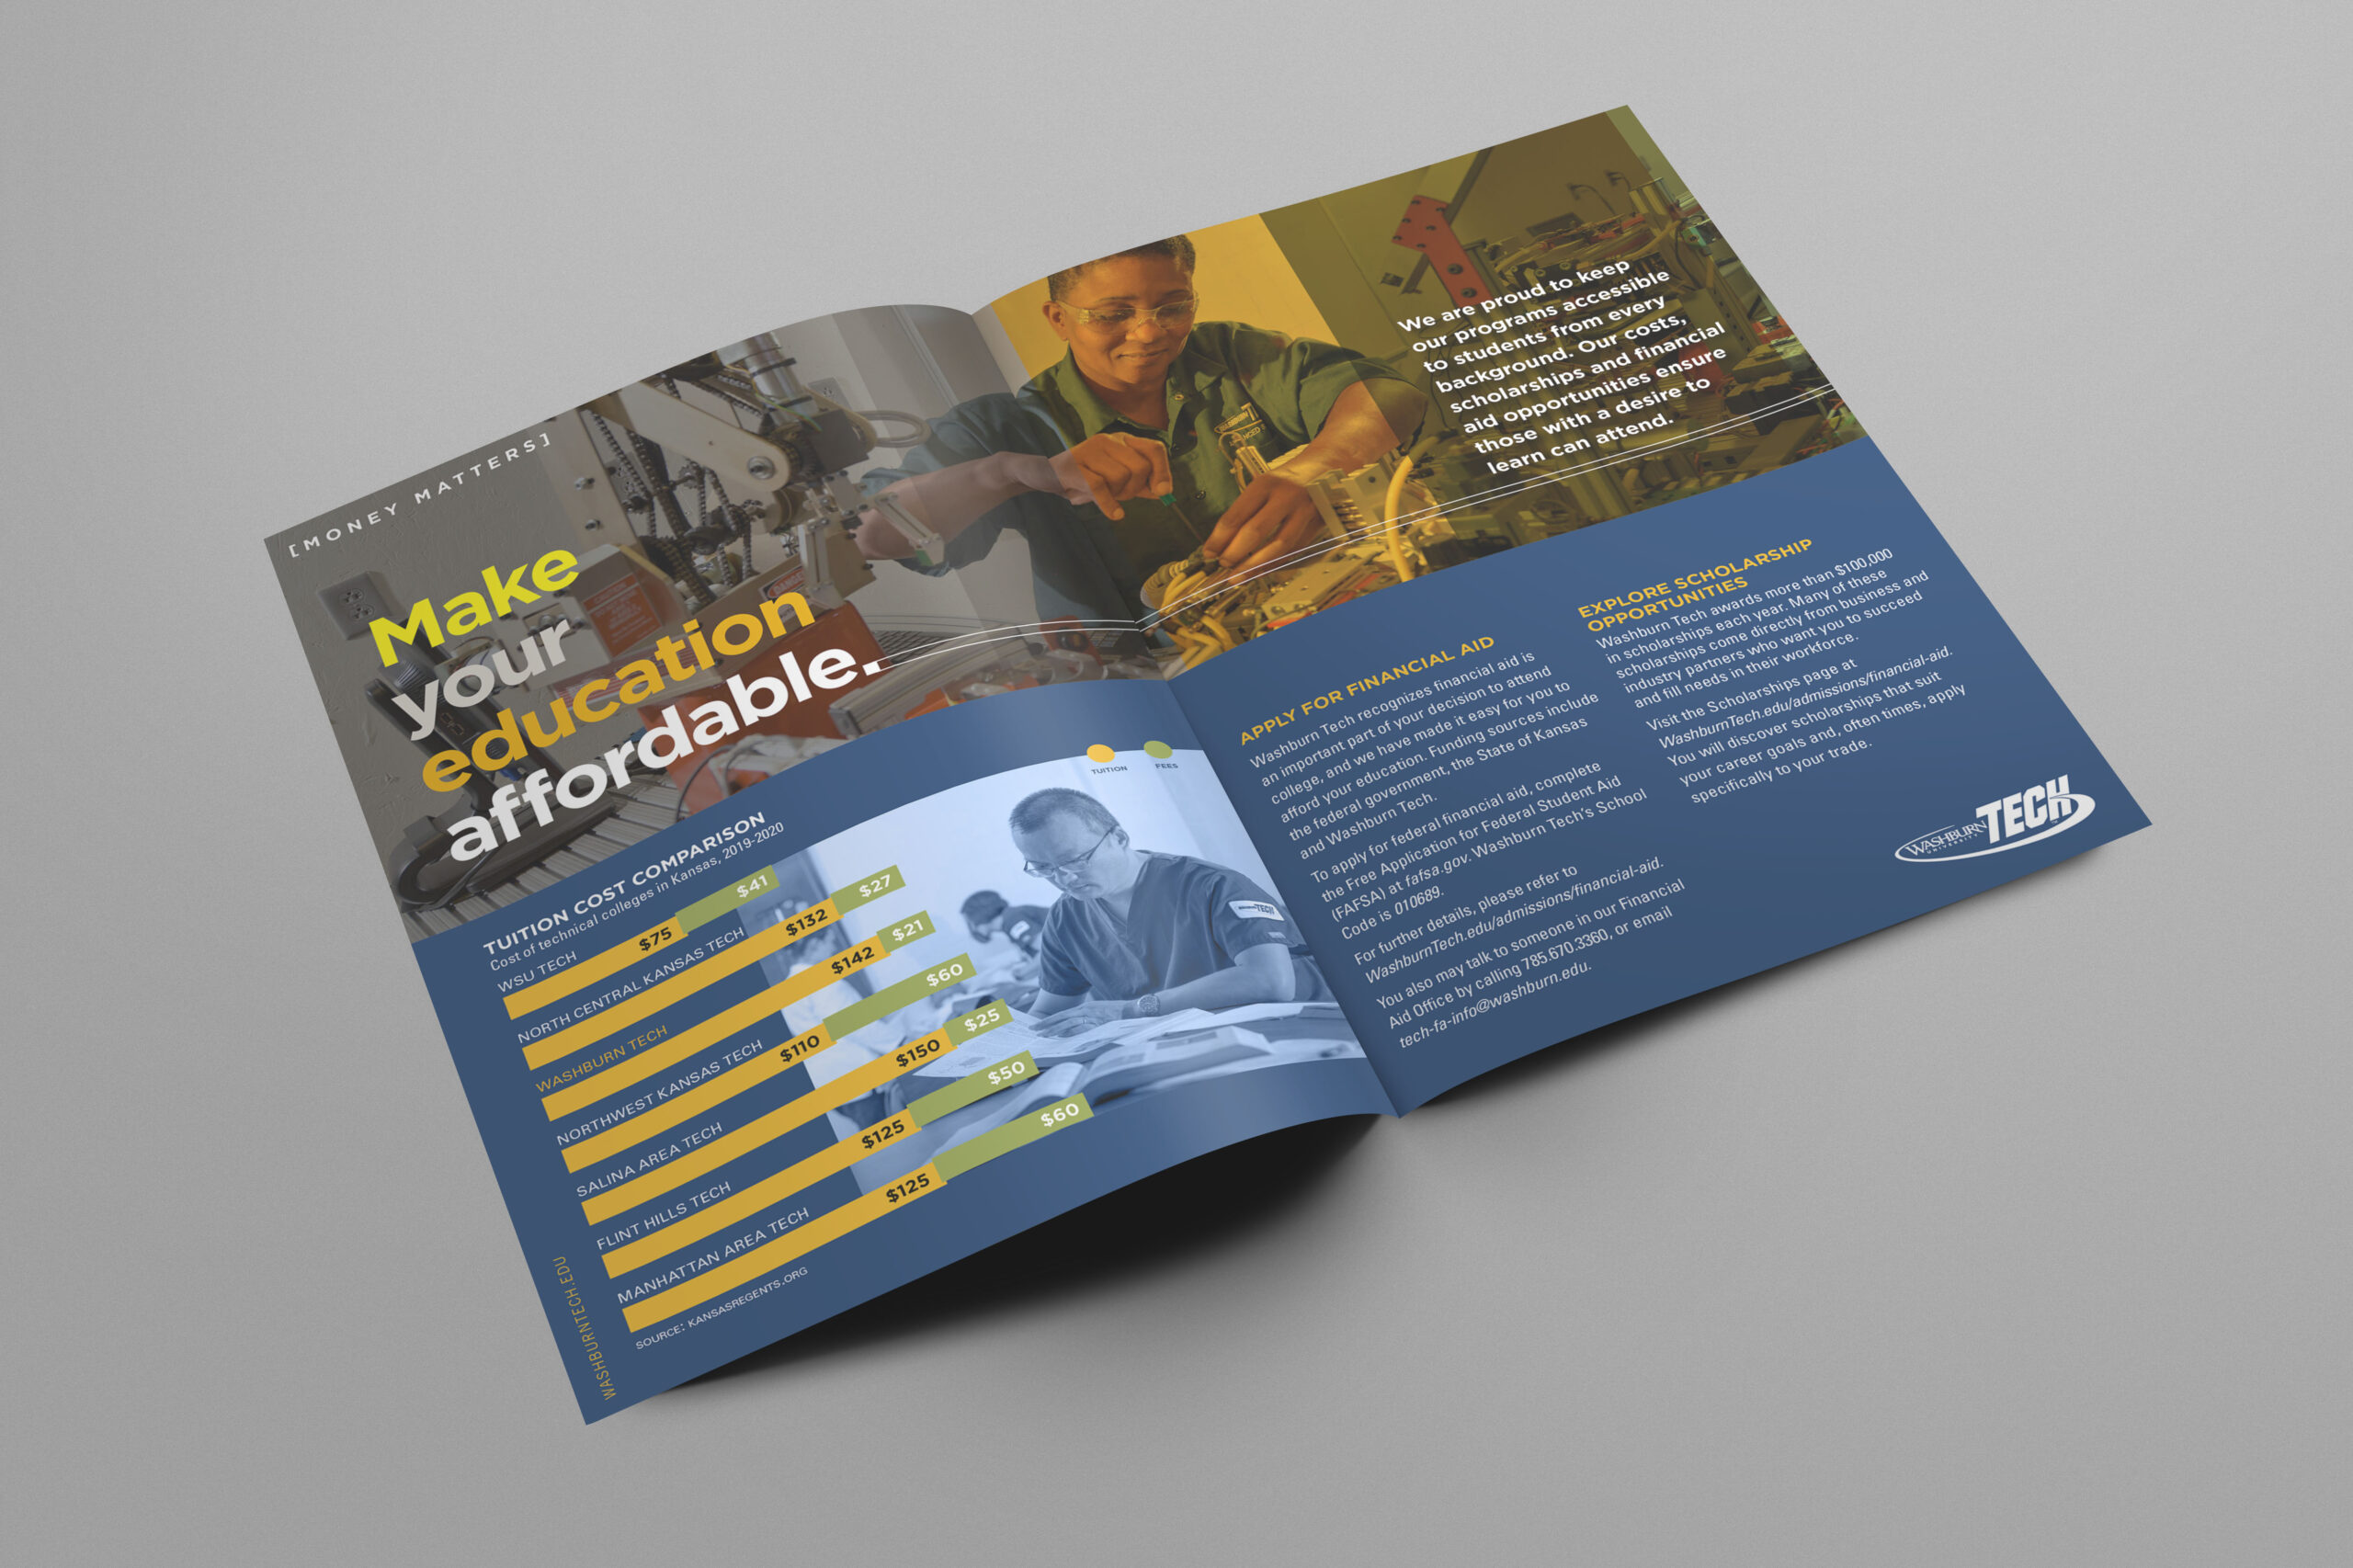 Make your Education Affordable Magazine Ad